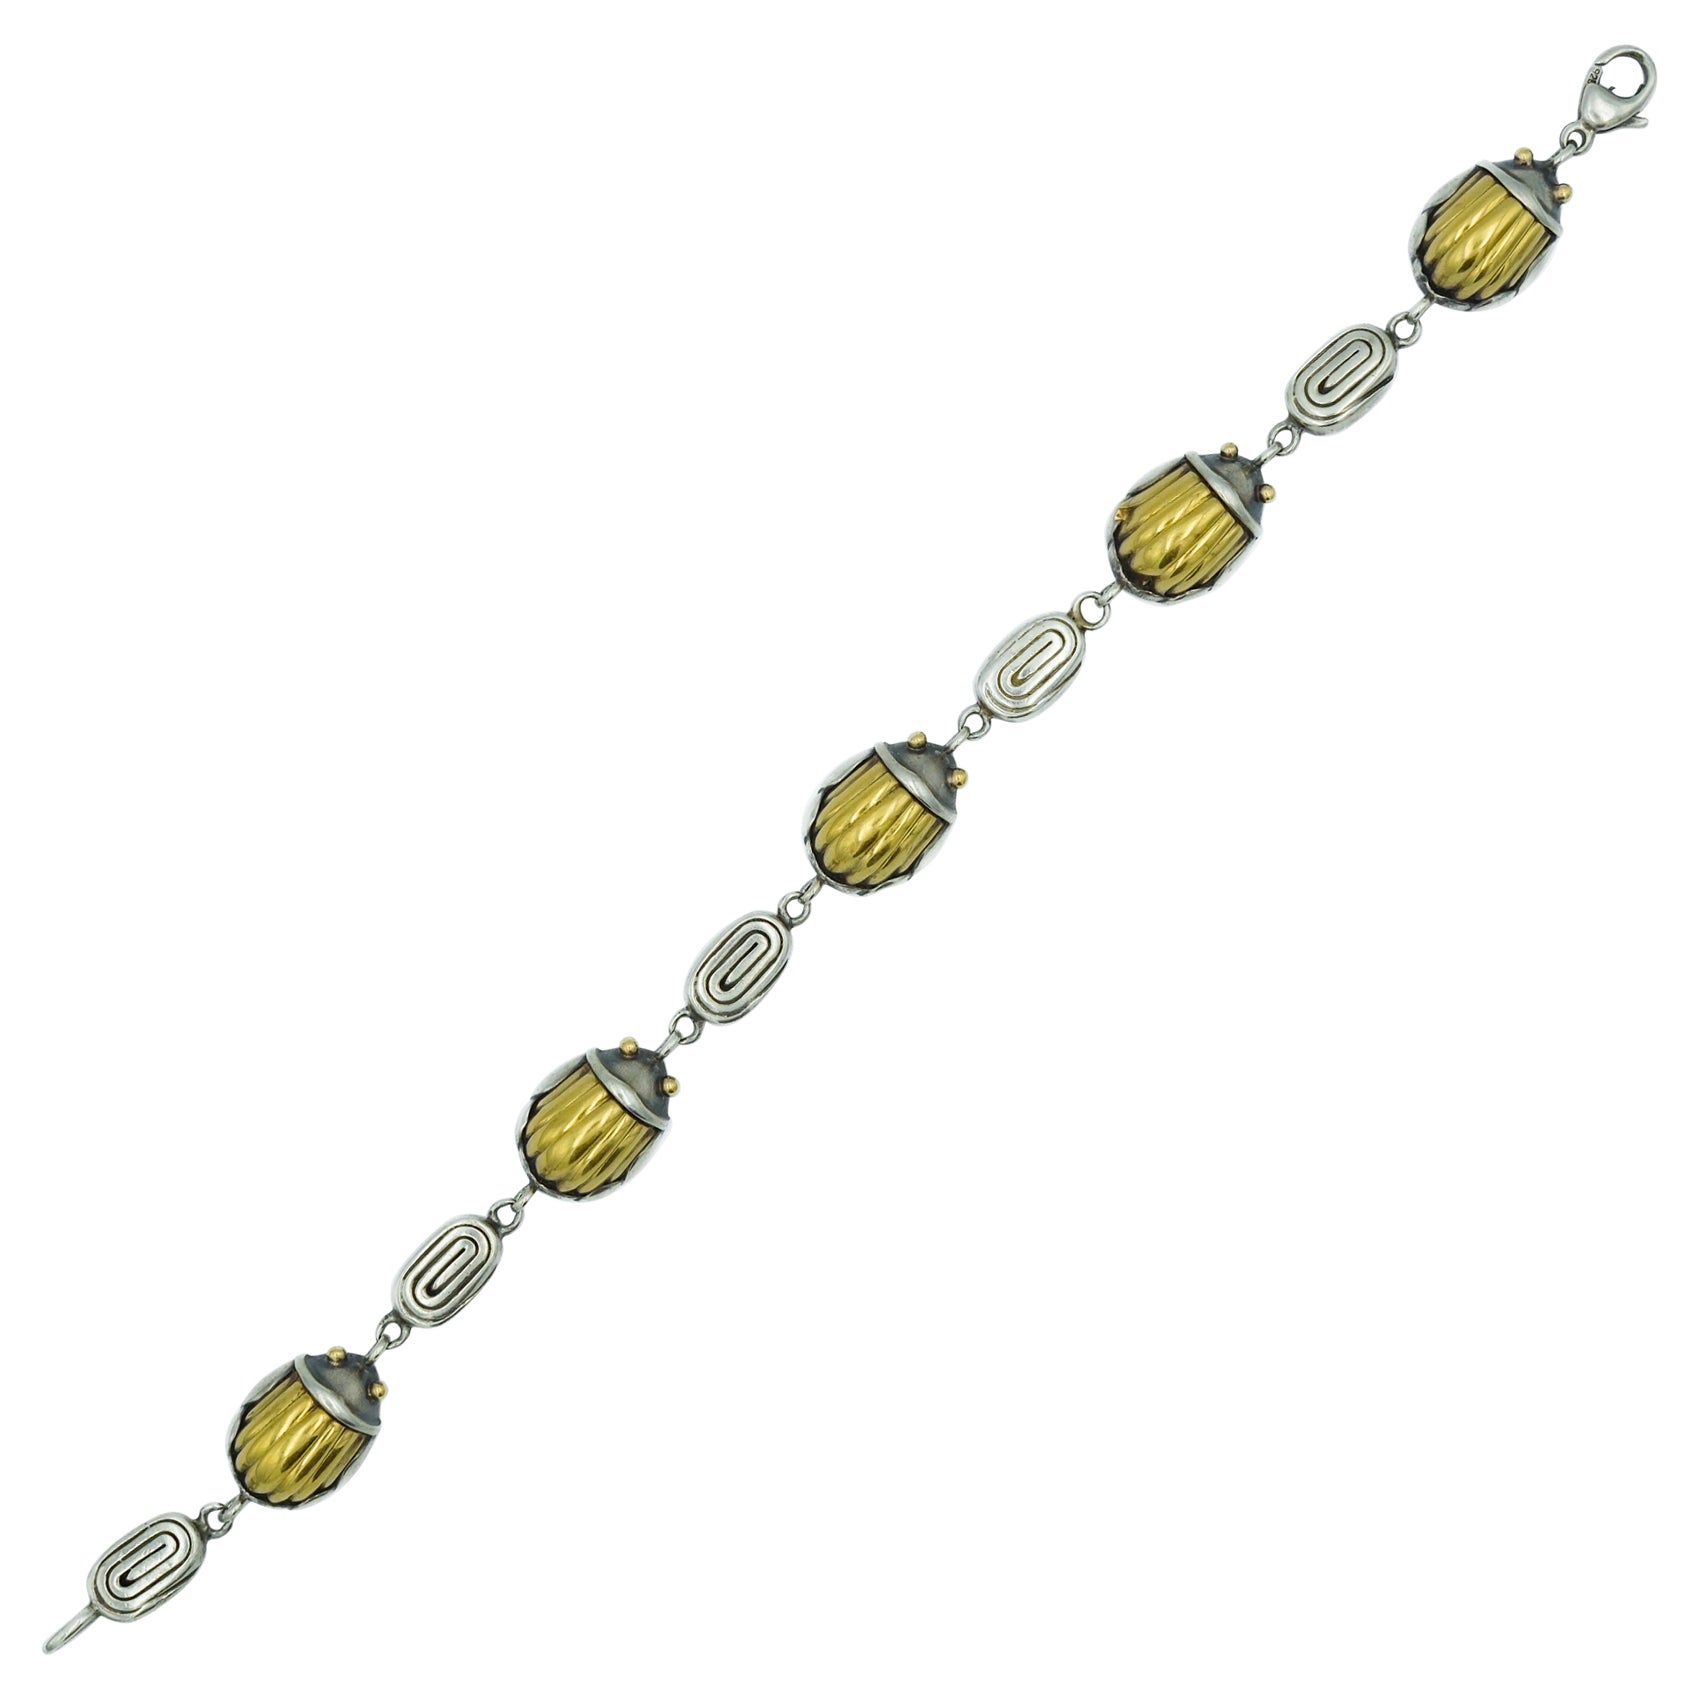 1993 Tiffany & Co. Scarab Link Bracelet in 18k Gold and 925 Sterling Silver For Sale